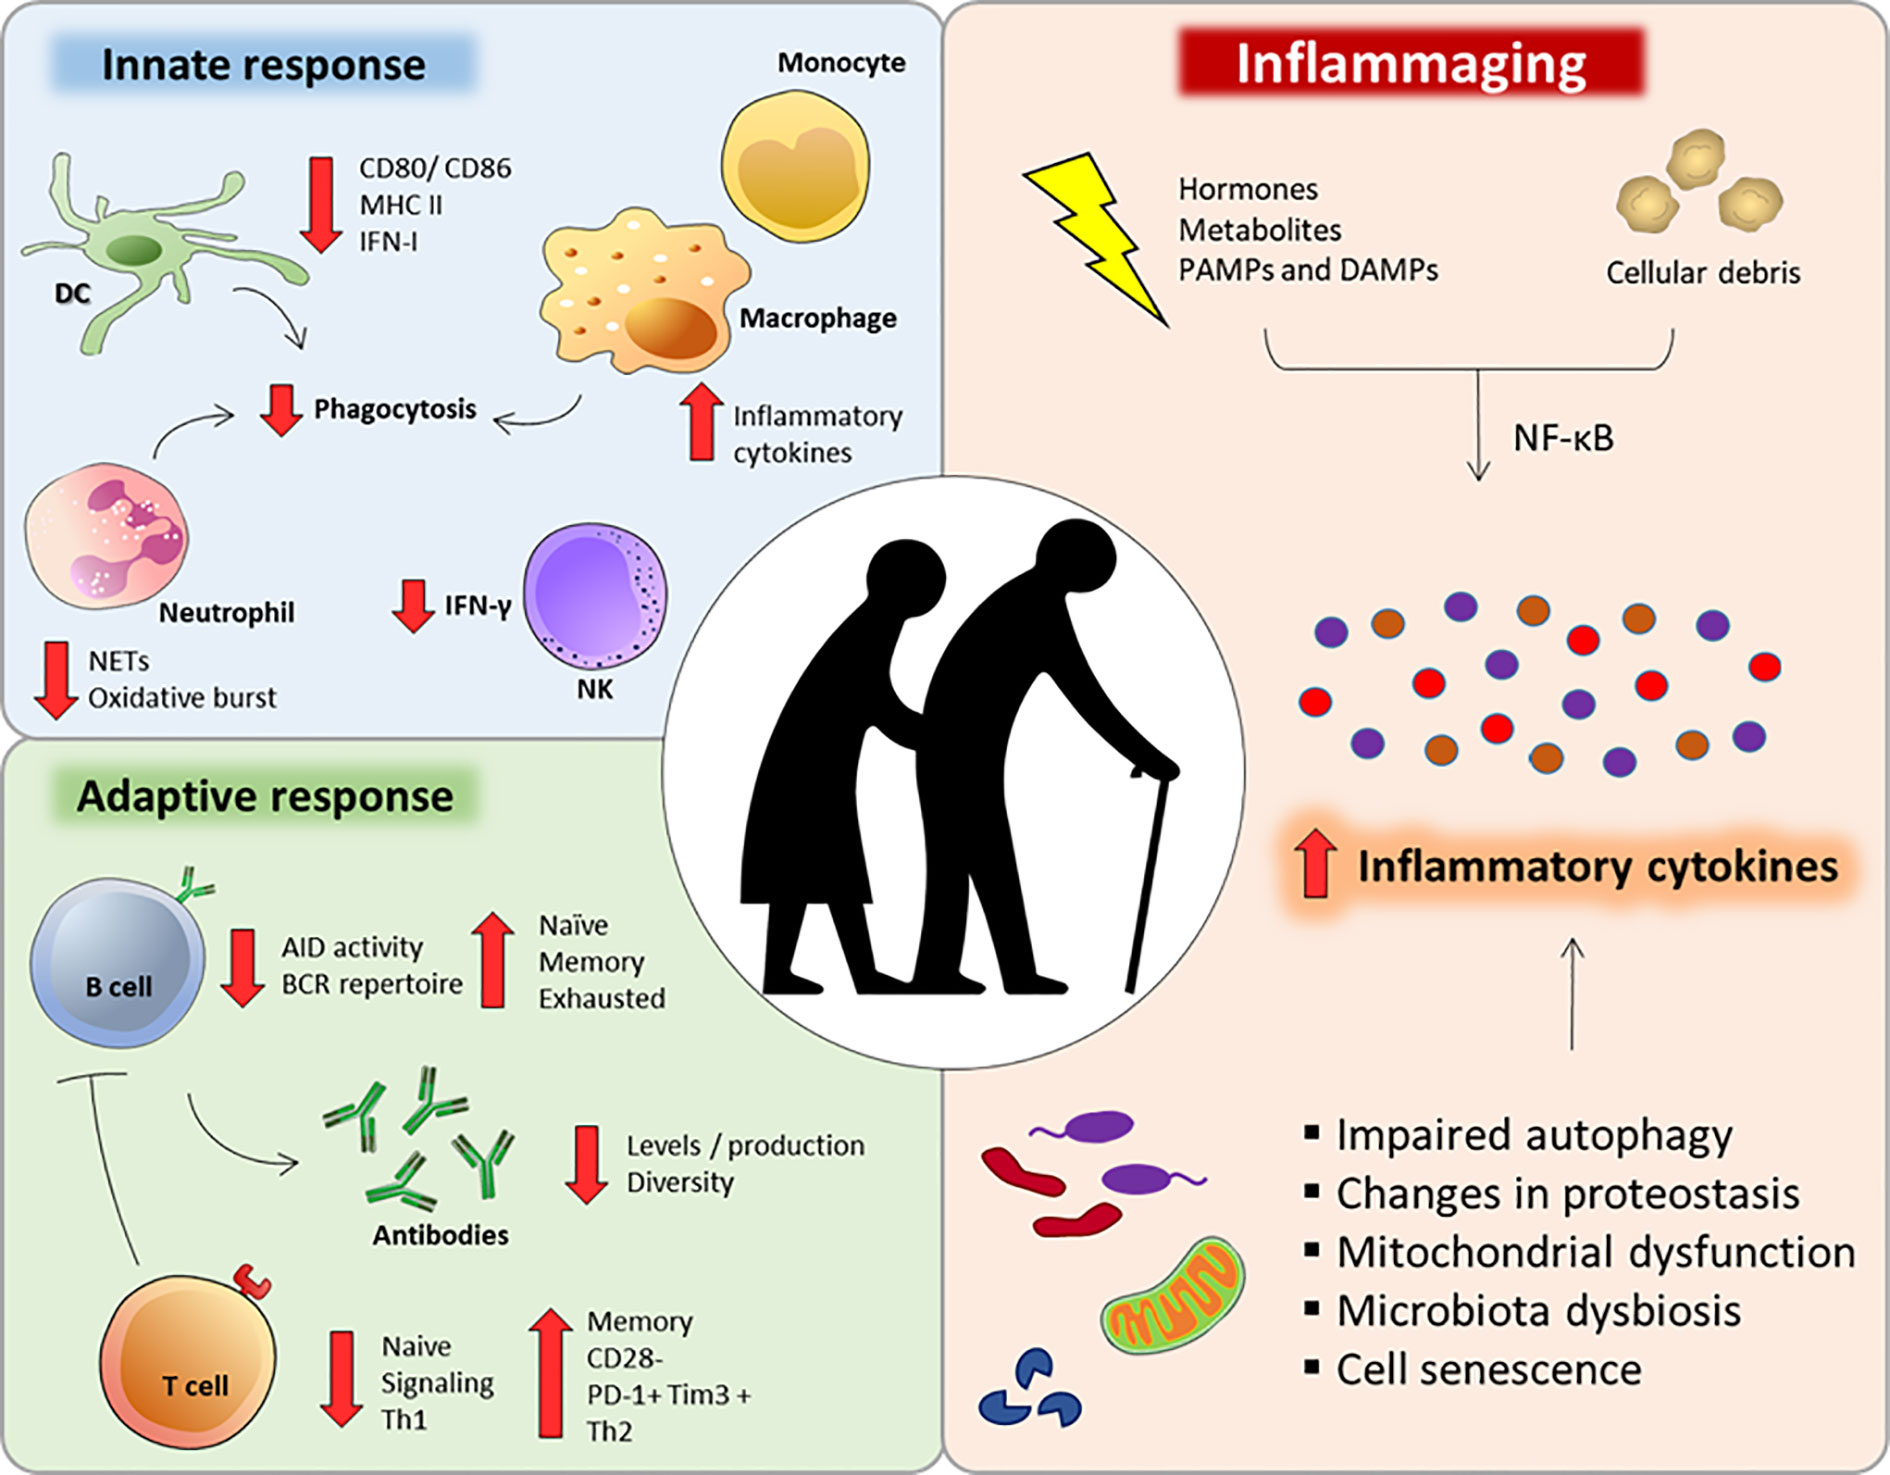 | I mmunosenescence and Inflammaging: Risk Factors of Severe COVID-19 in Older People | Immunology